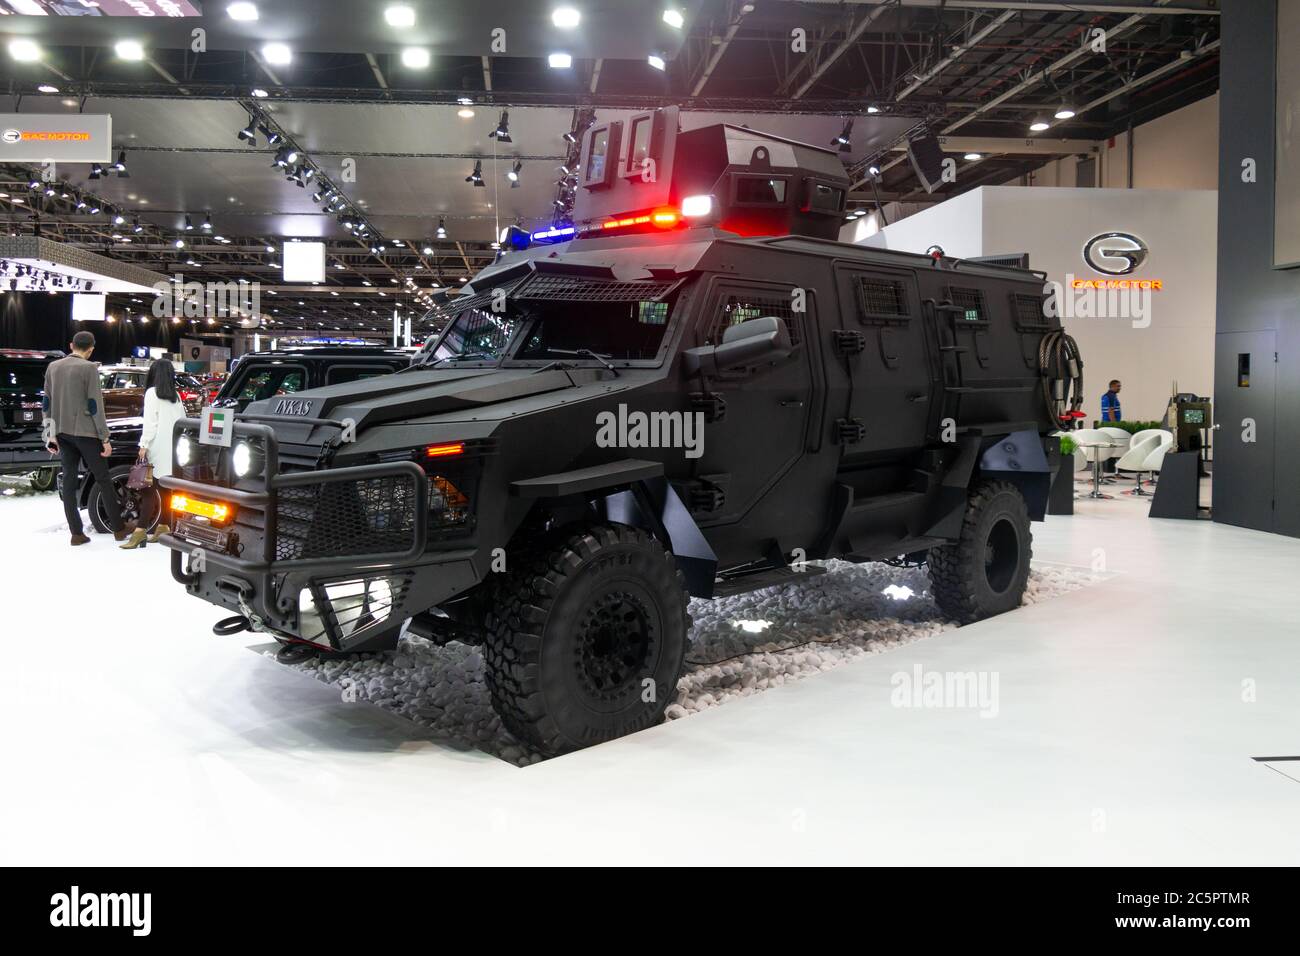 premium-armored-vehicle-displayed-in-a-car-show-safety-and-luxury-automobile-inkas-2C5PTMR.jpg